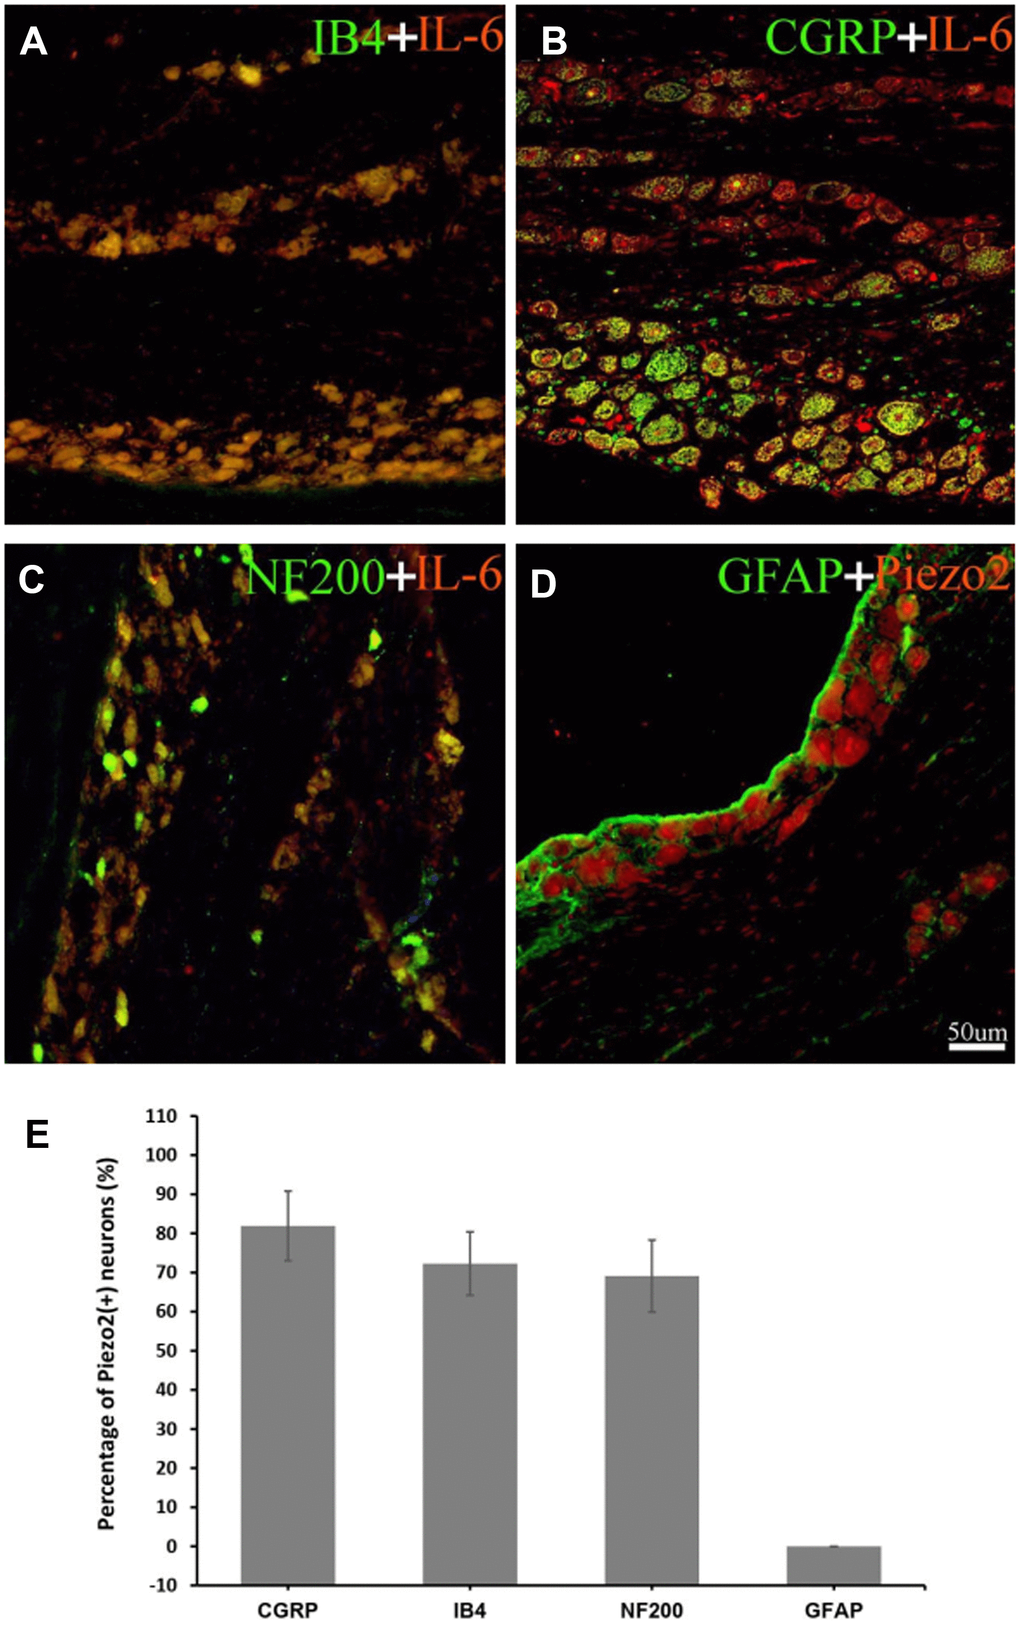 Double immunofluorescence staining of IL-6. The double immunofluorescence staining shows IL-6 is co-localized with IB4 (a marker for C-type neurons) (A), CGRP (a marker for small nociceptive peptidergic neurons) (B) and NF-200 (a marker for A-type neurons) (C) but not with GFAP (a marker for satellite glial cells) (D). With calculation, the percentage of IL-6 in IB4, CGRP, NF200 neuron was 72.3±8.1%, 81.9±8.9%, 69.1±9.2% respectively (E). The red refers to IL-6, the green refers to IB4, CGRP, NF-200 or GFAP, and the yellow refers to the colocalization.